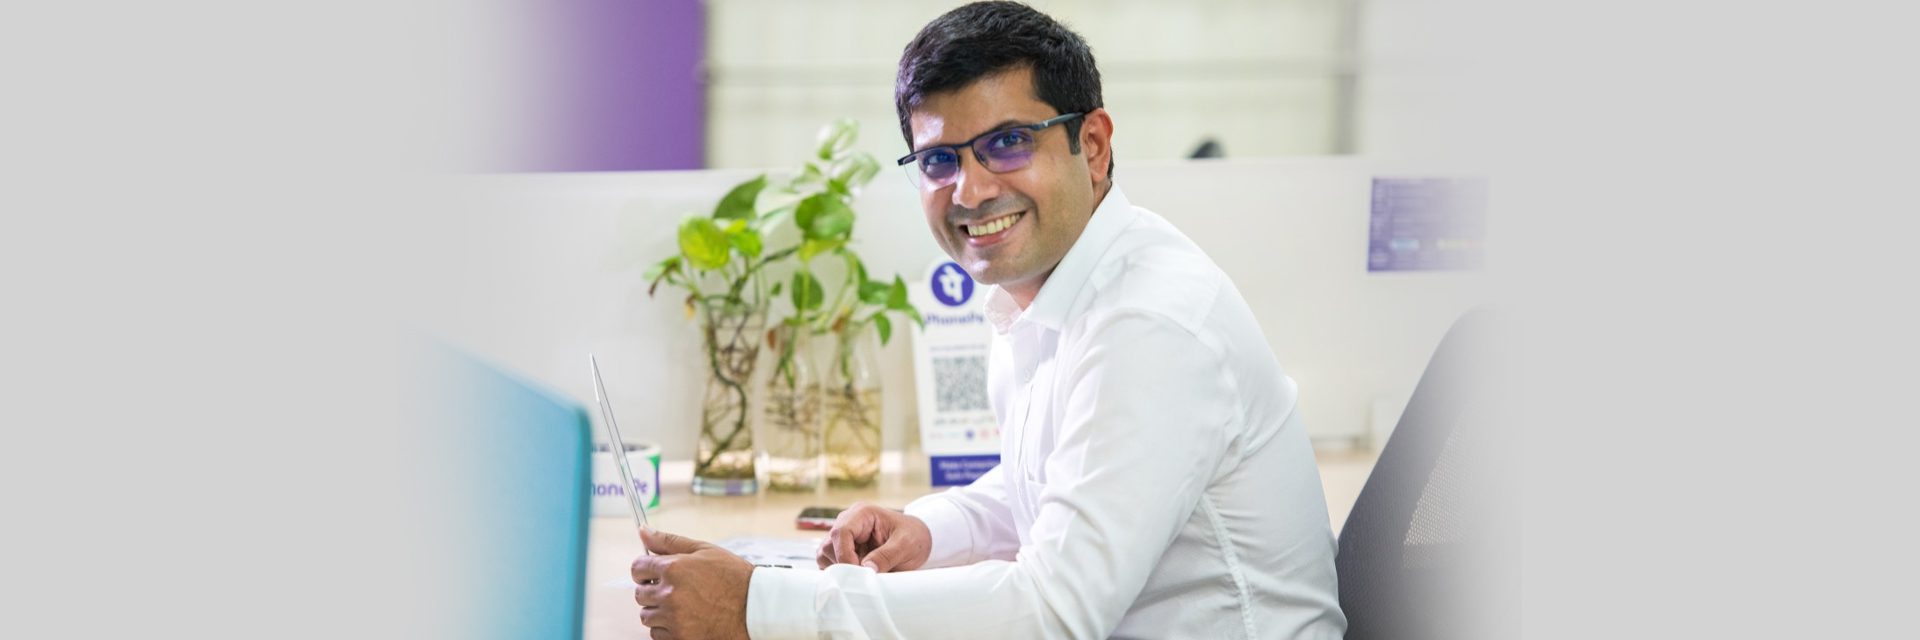 How PhonePe founder Rahul Chari is revolutionising fintech in India